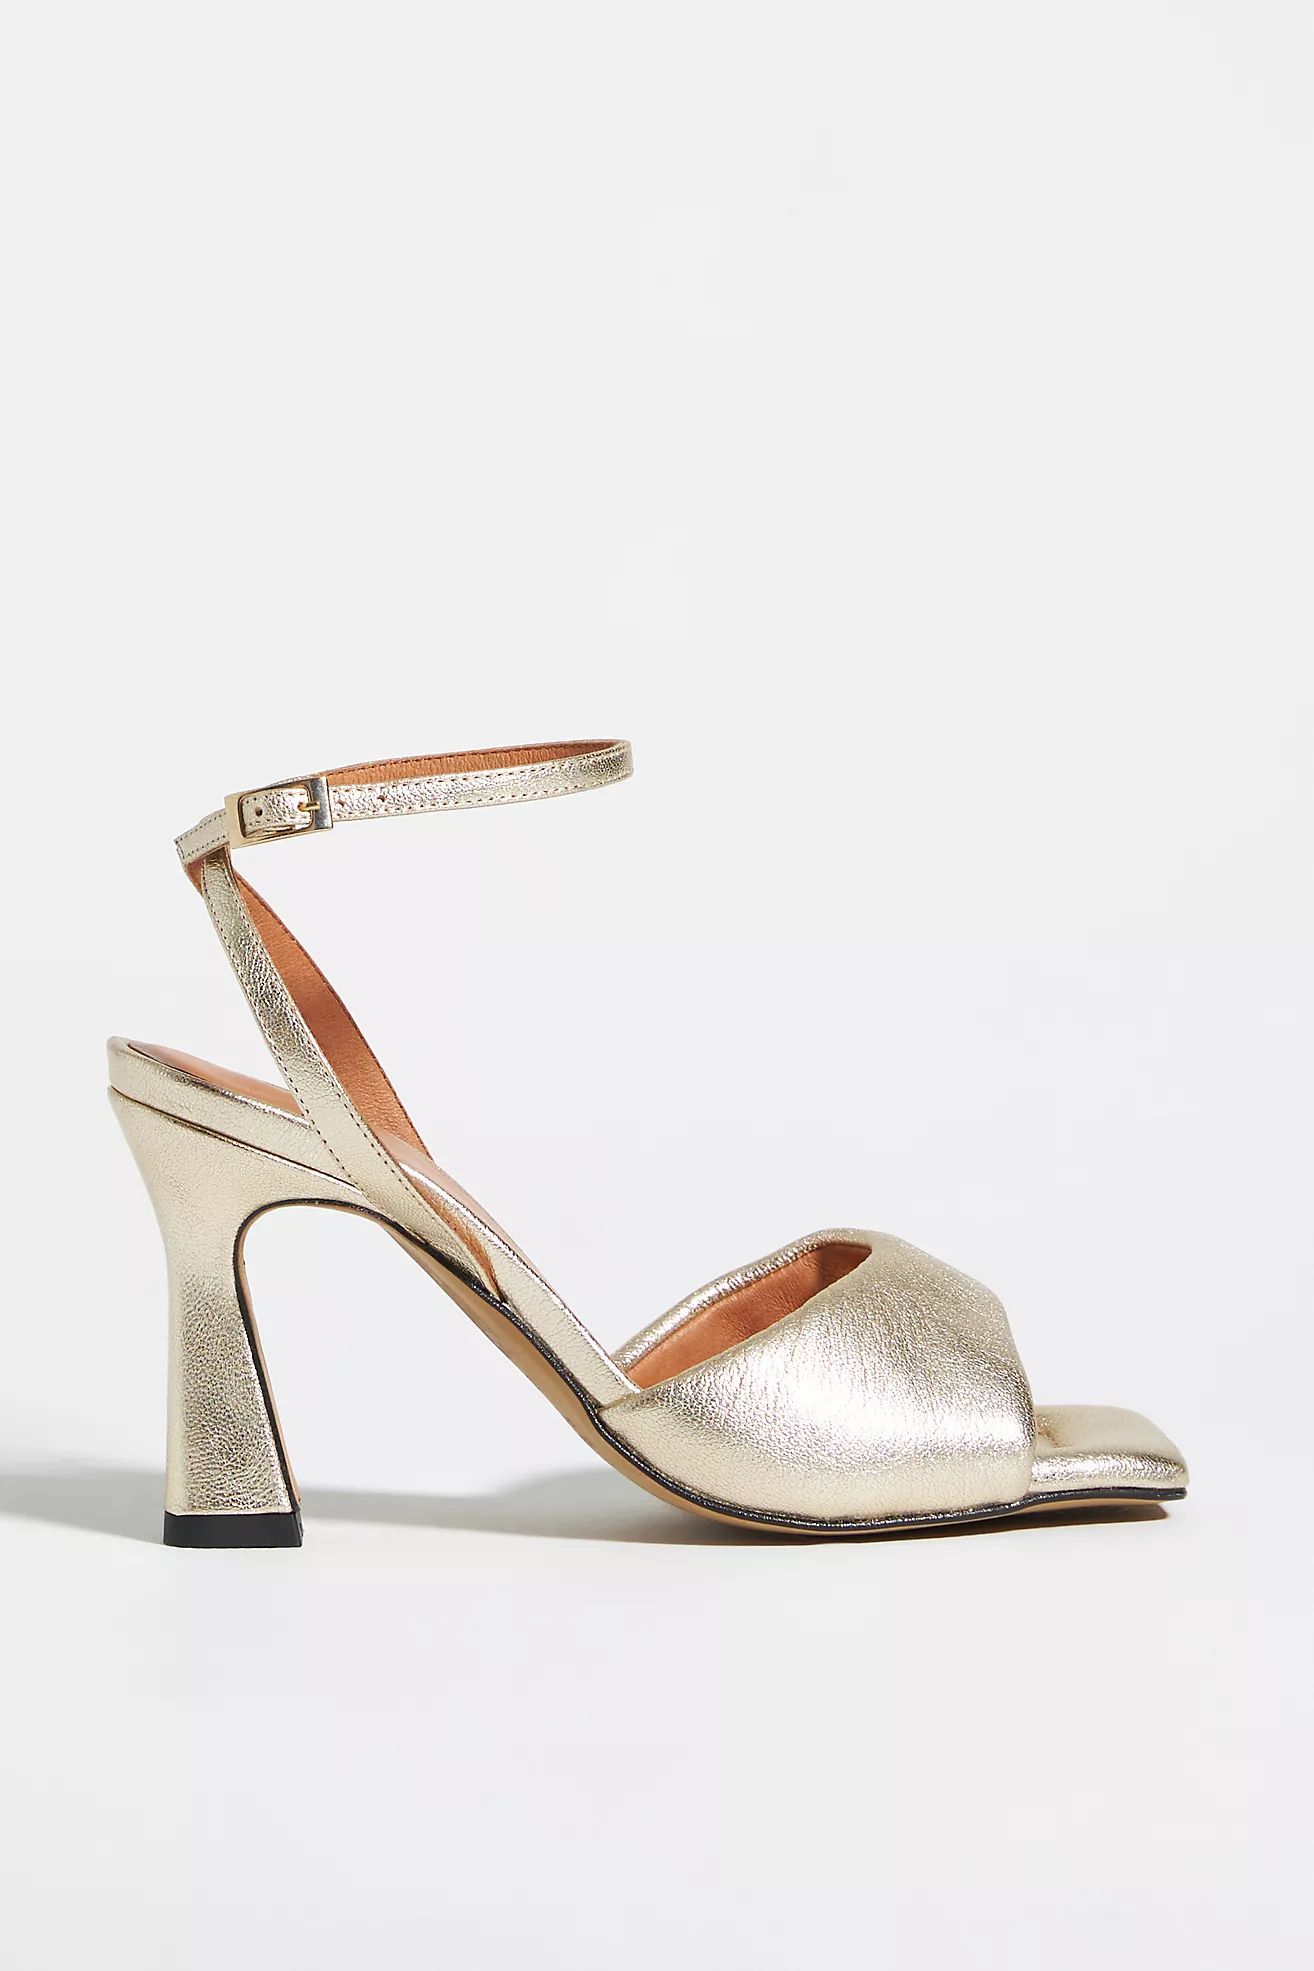 Maeve Puffy Ankle-Strap Heels | Anthropologie (US)